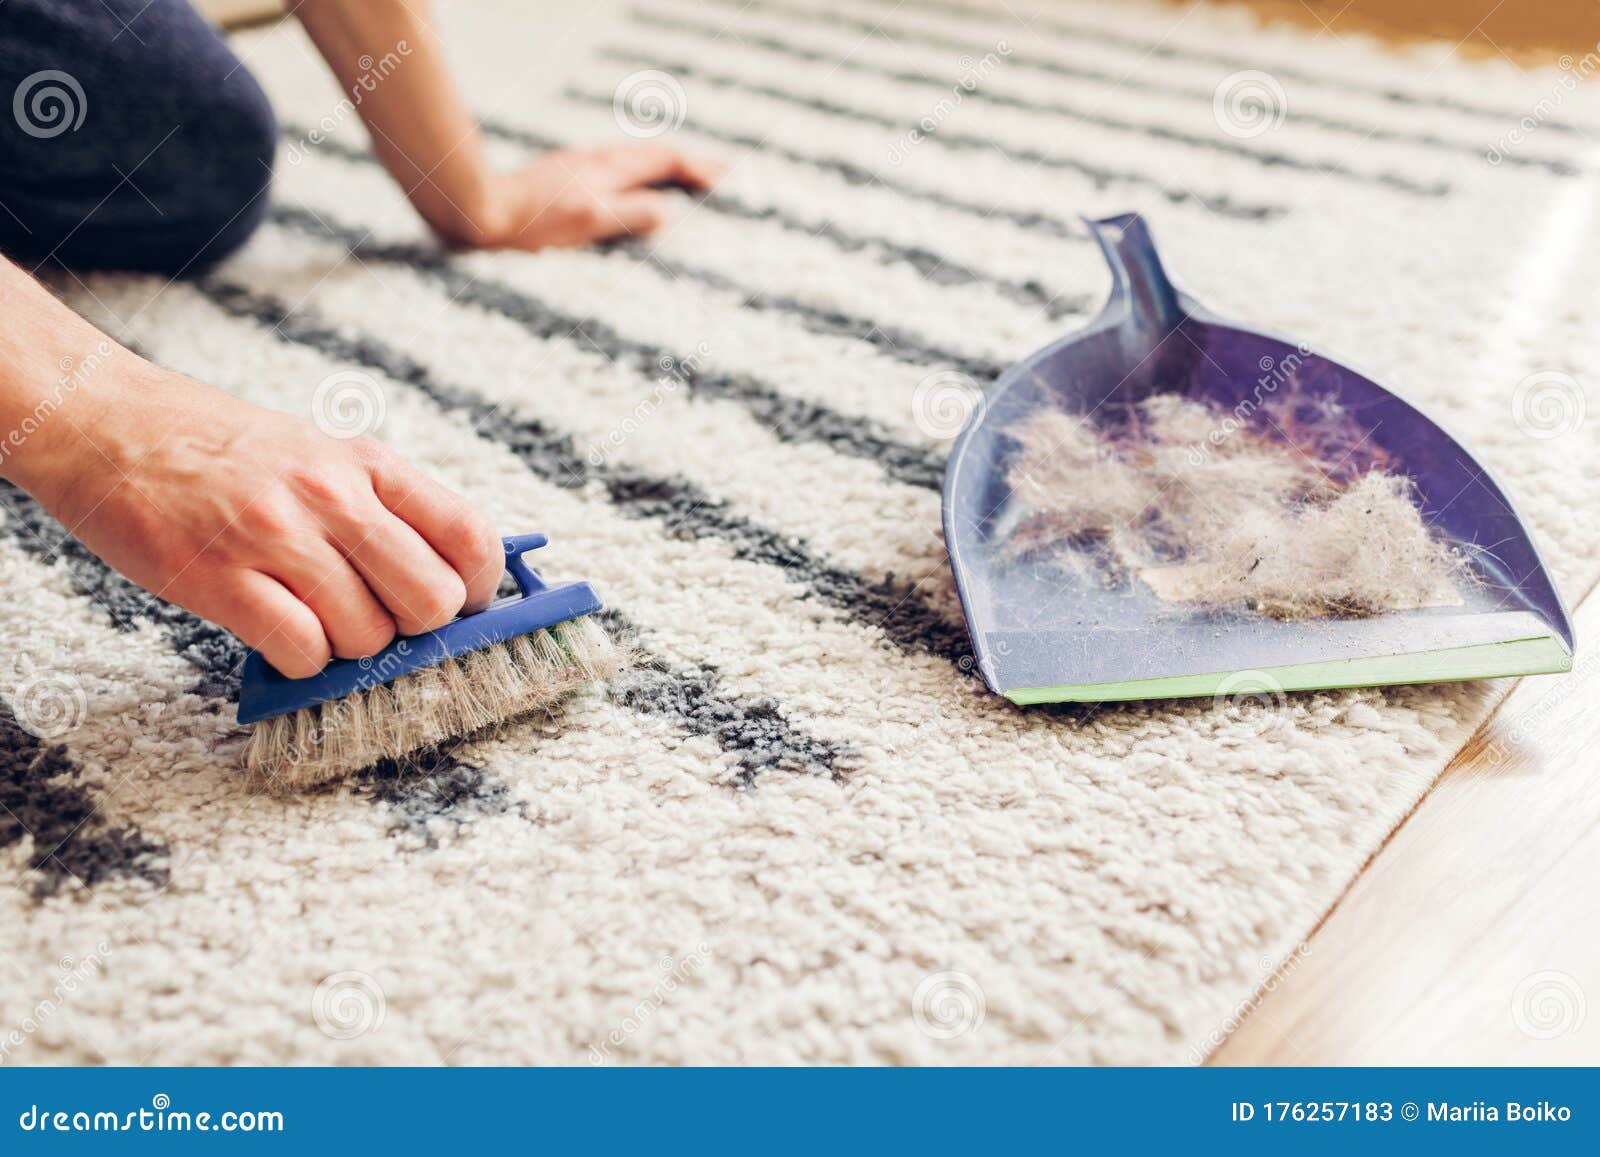 Cleaning Carpet from Cat Hair with Brush at Home. Man Cleans Dirty